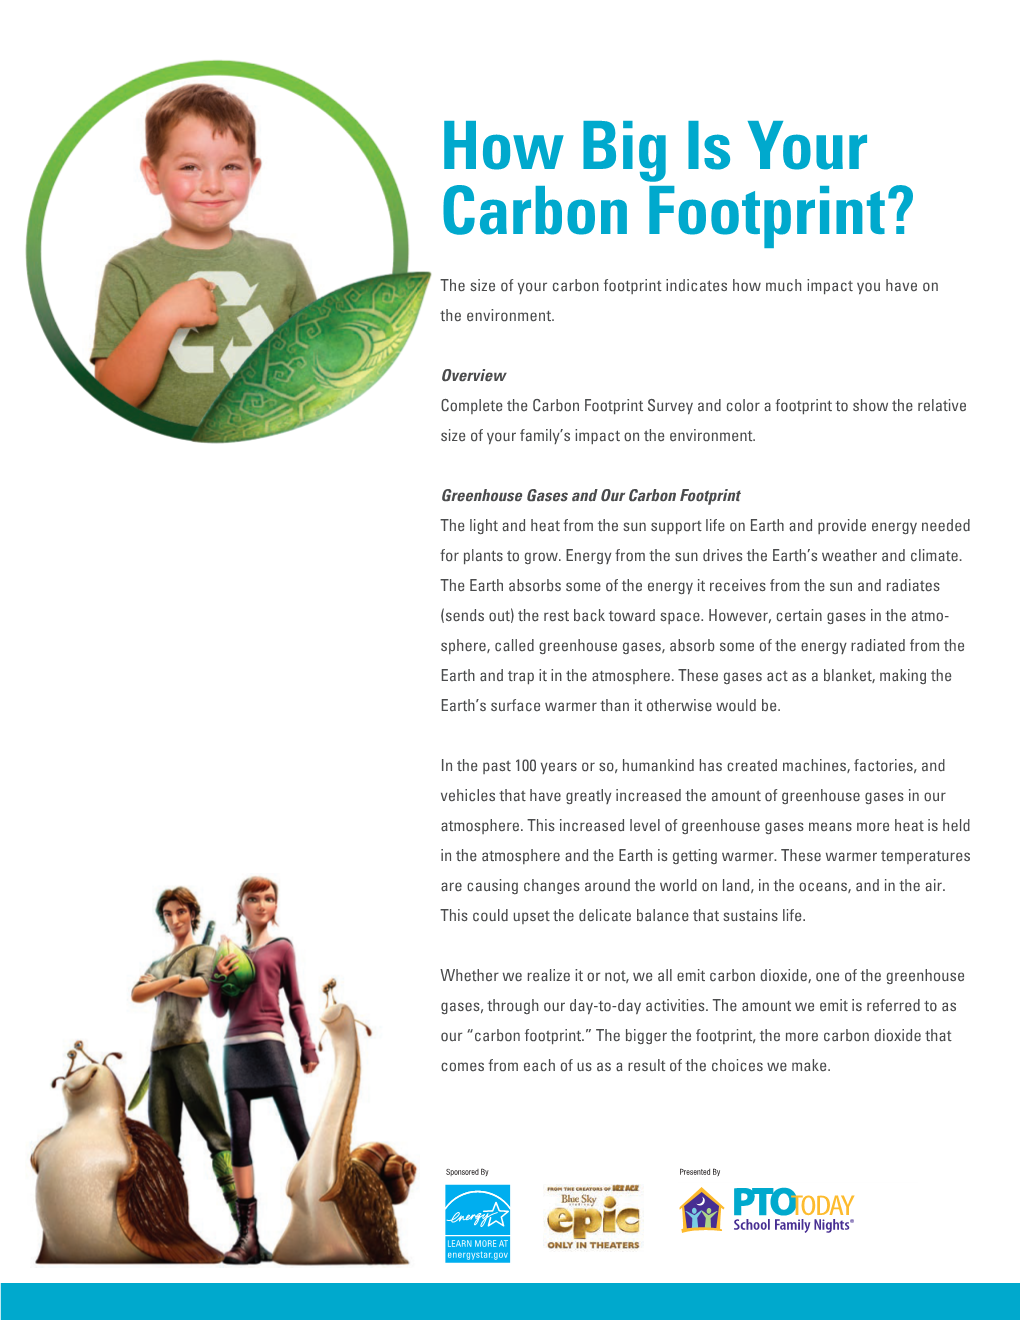 How Big Is Your Carbon Footprint?